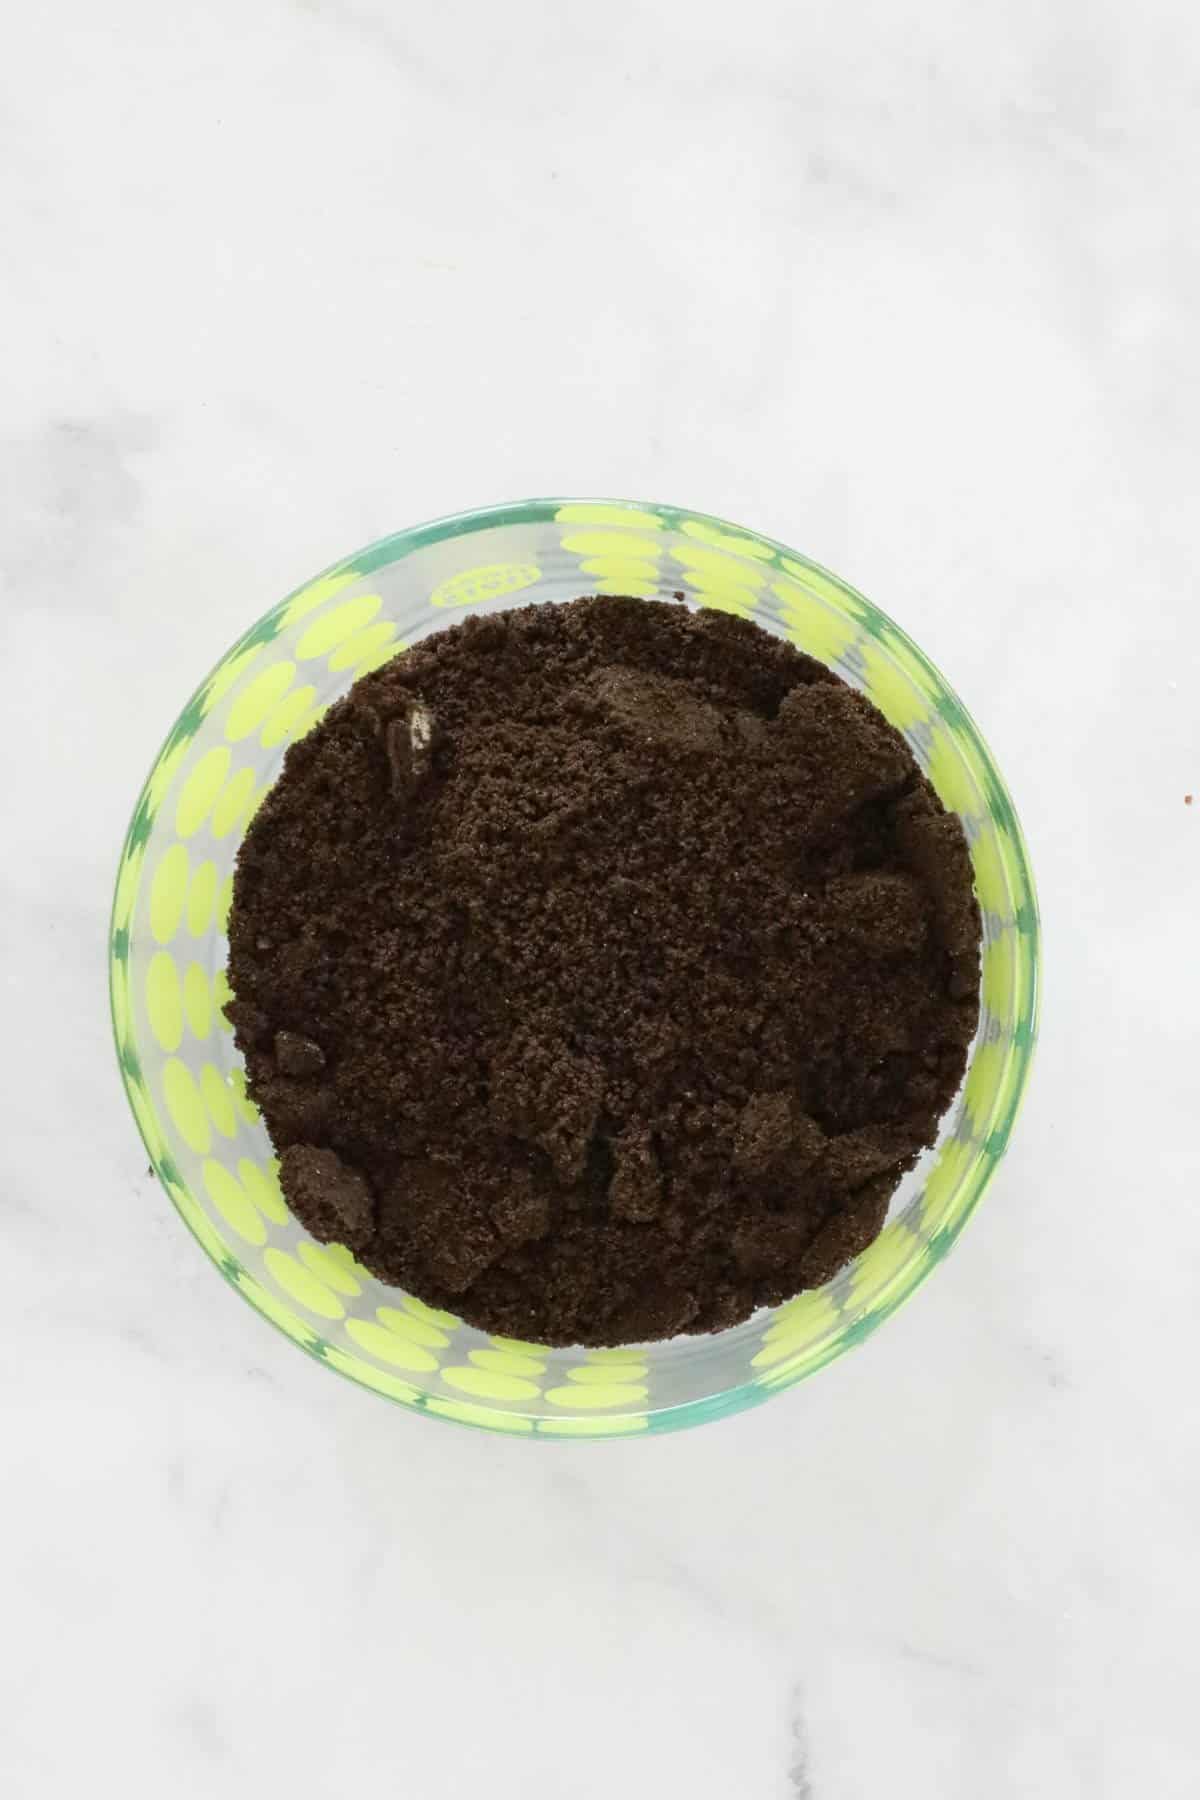 Crushed Oreos in a coloured glass bowl.